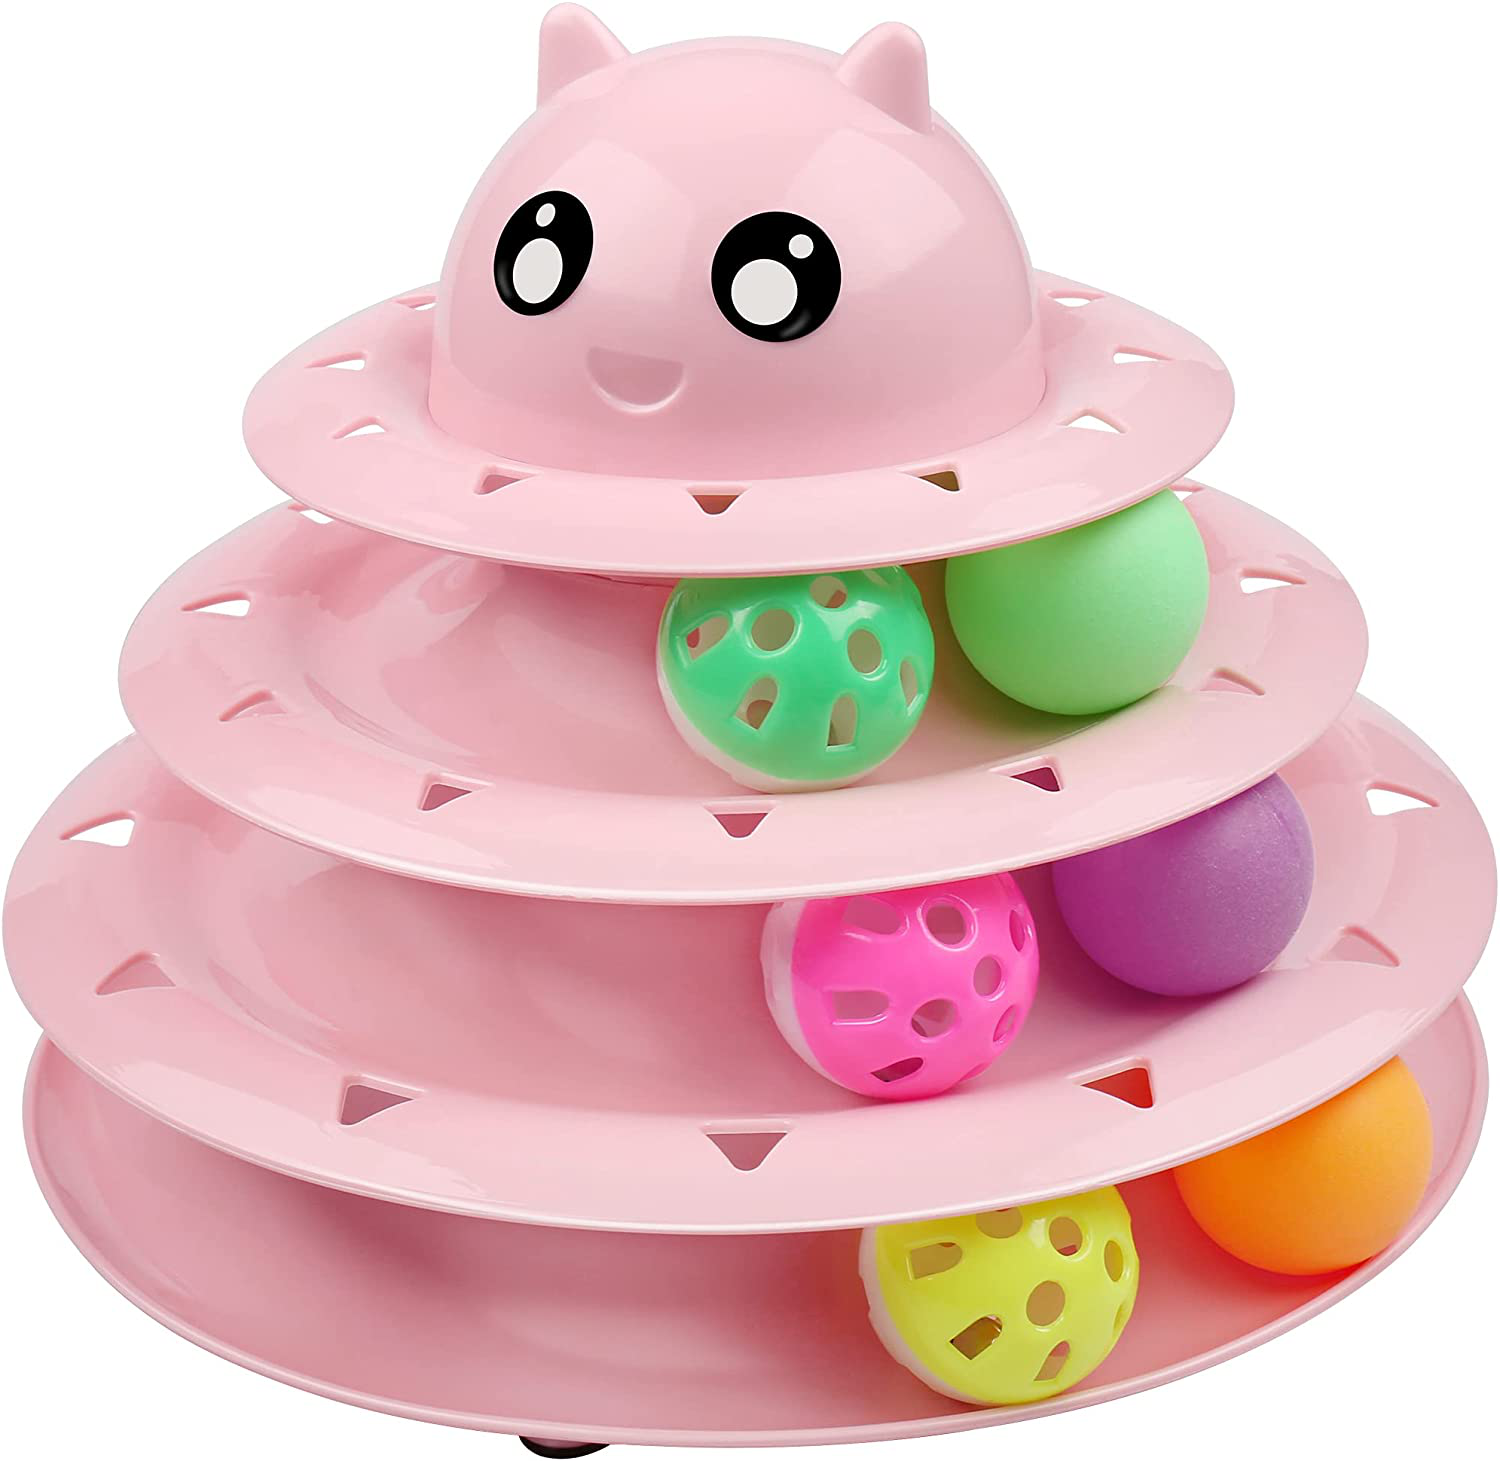 UPSKY Cat Toy Roller 3-Level Turntable Cat Toys Balls with Six Colorful Balls Interactive Kitten Fun Mental Physical Exercise Puzzle Kitten Toys. Animals & Pet Supplies > Pet Supplies > Dog Supplies > Dog Treadmills UPSKY Pink  